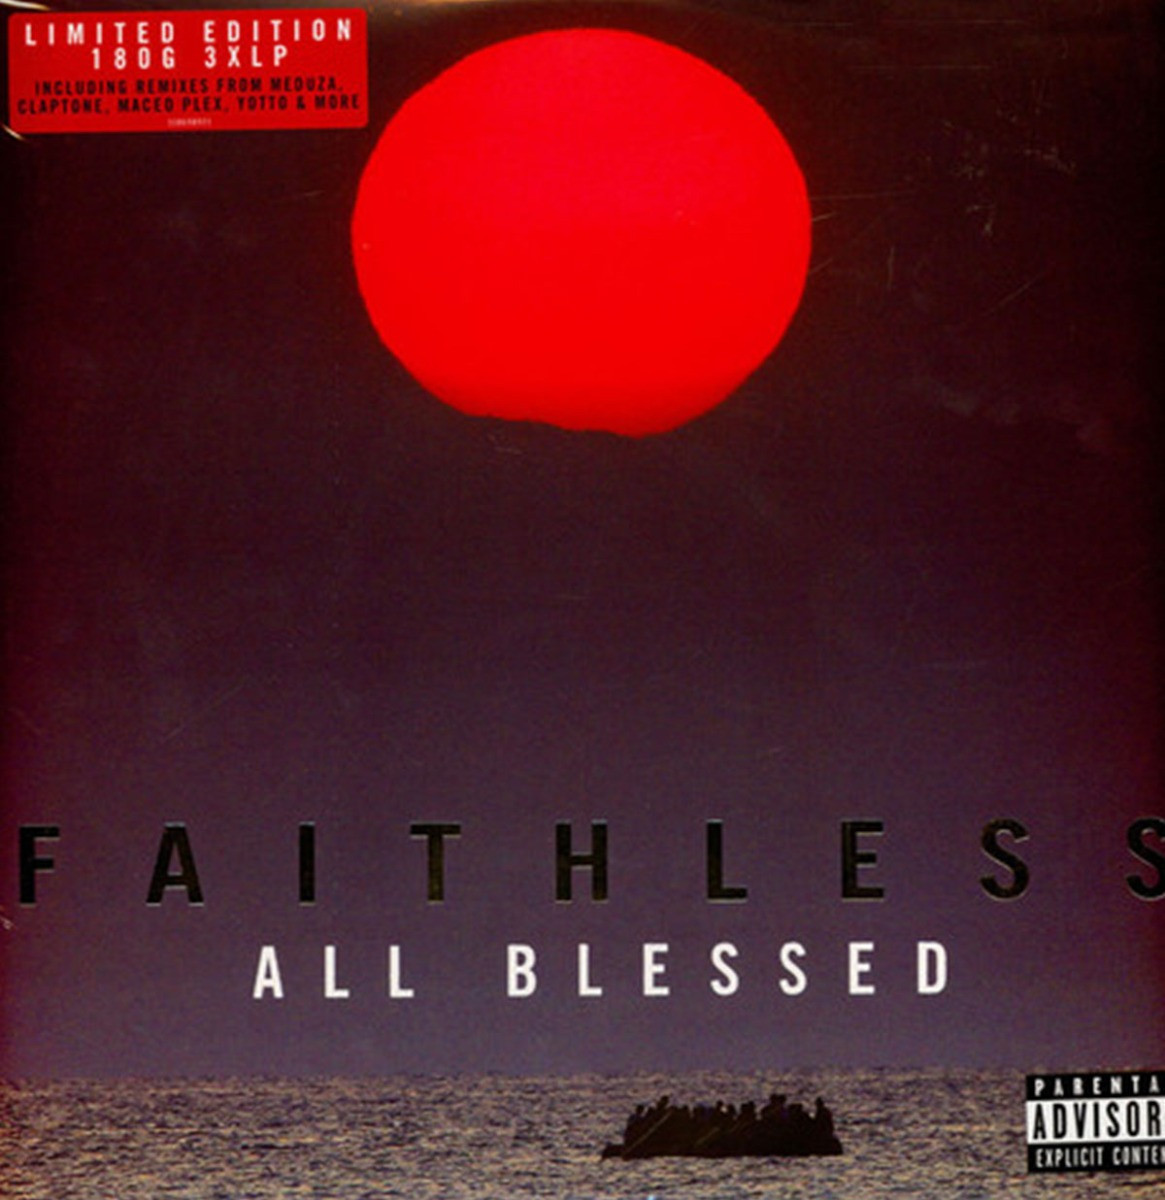 Faithless - All Blessed (Deluxe Edition) 3LP